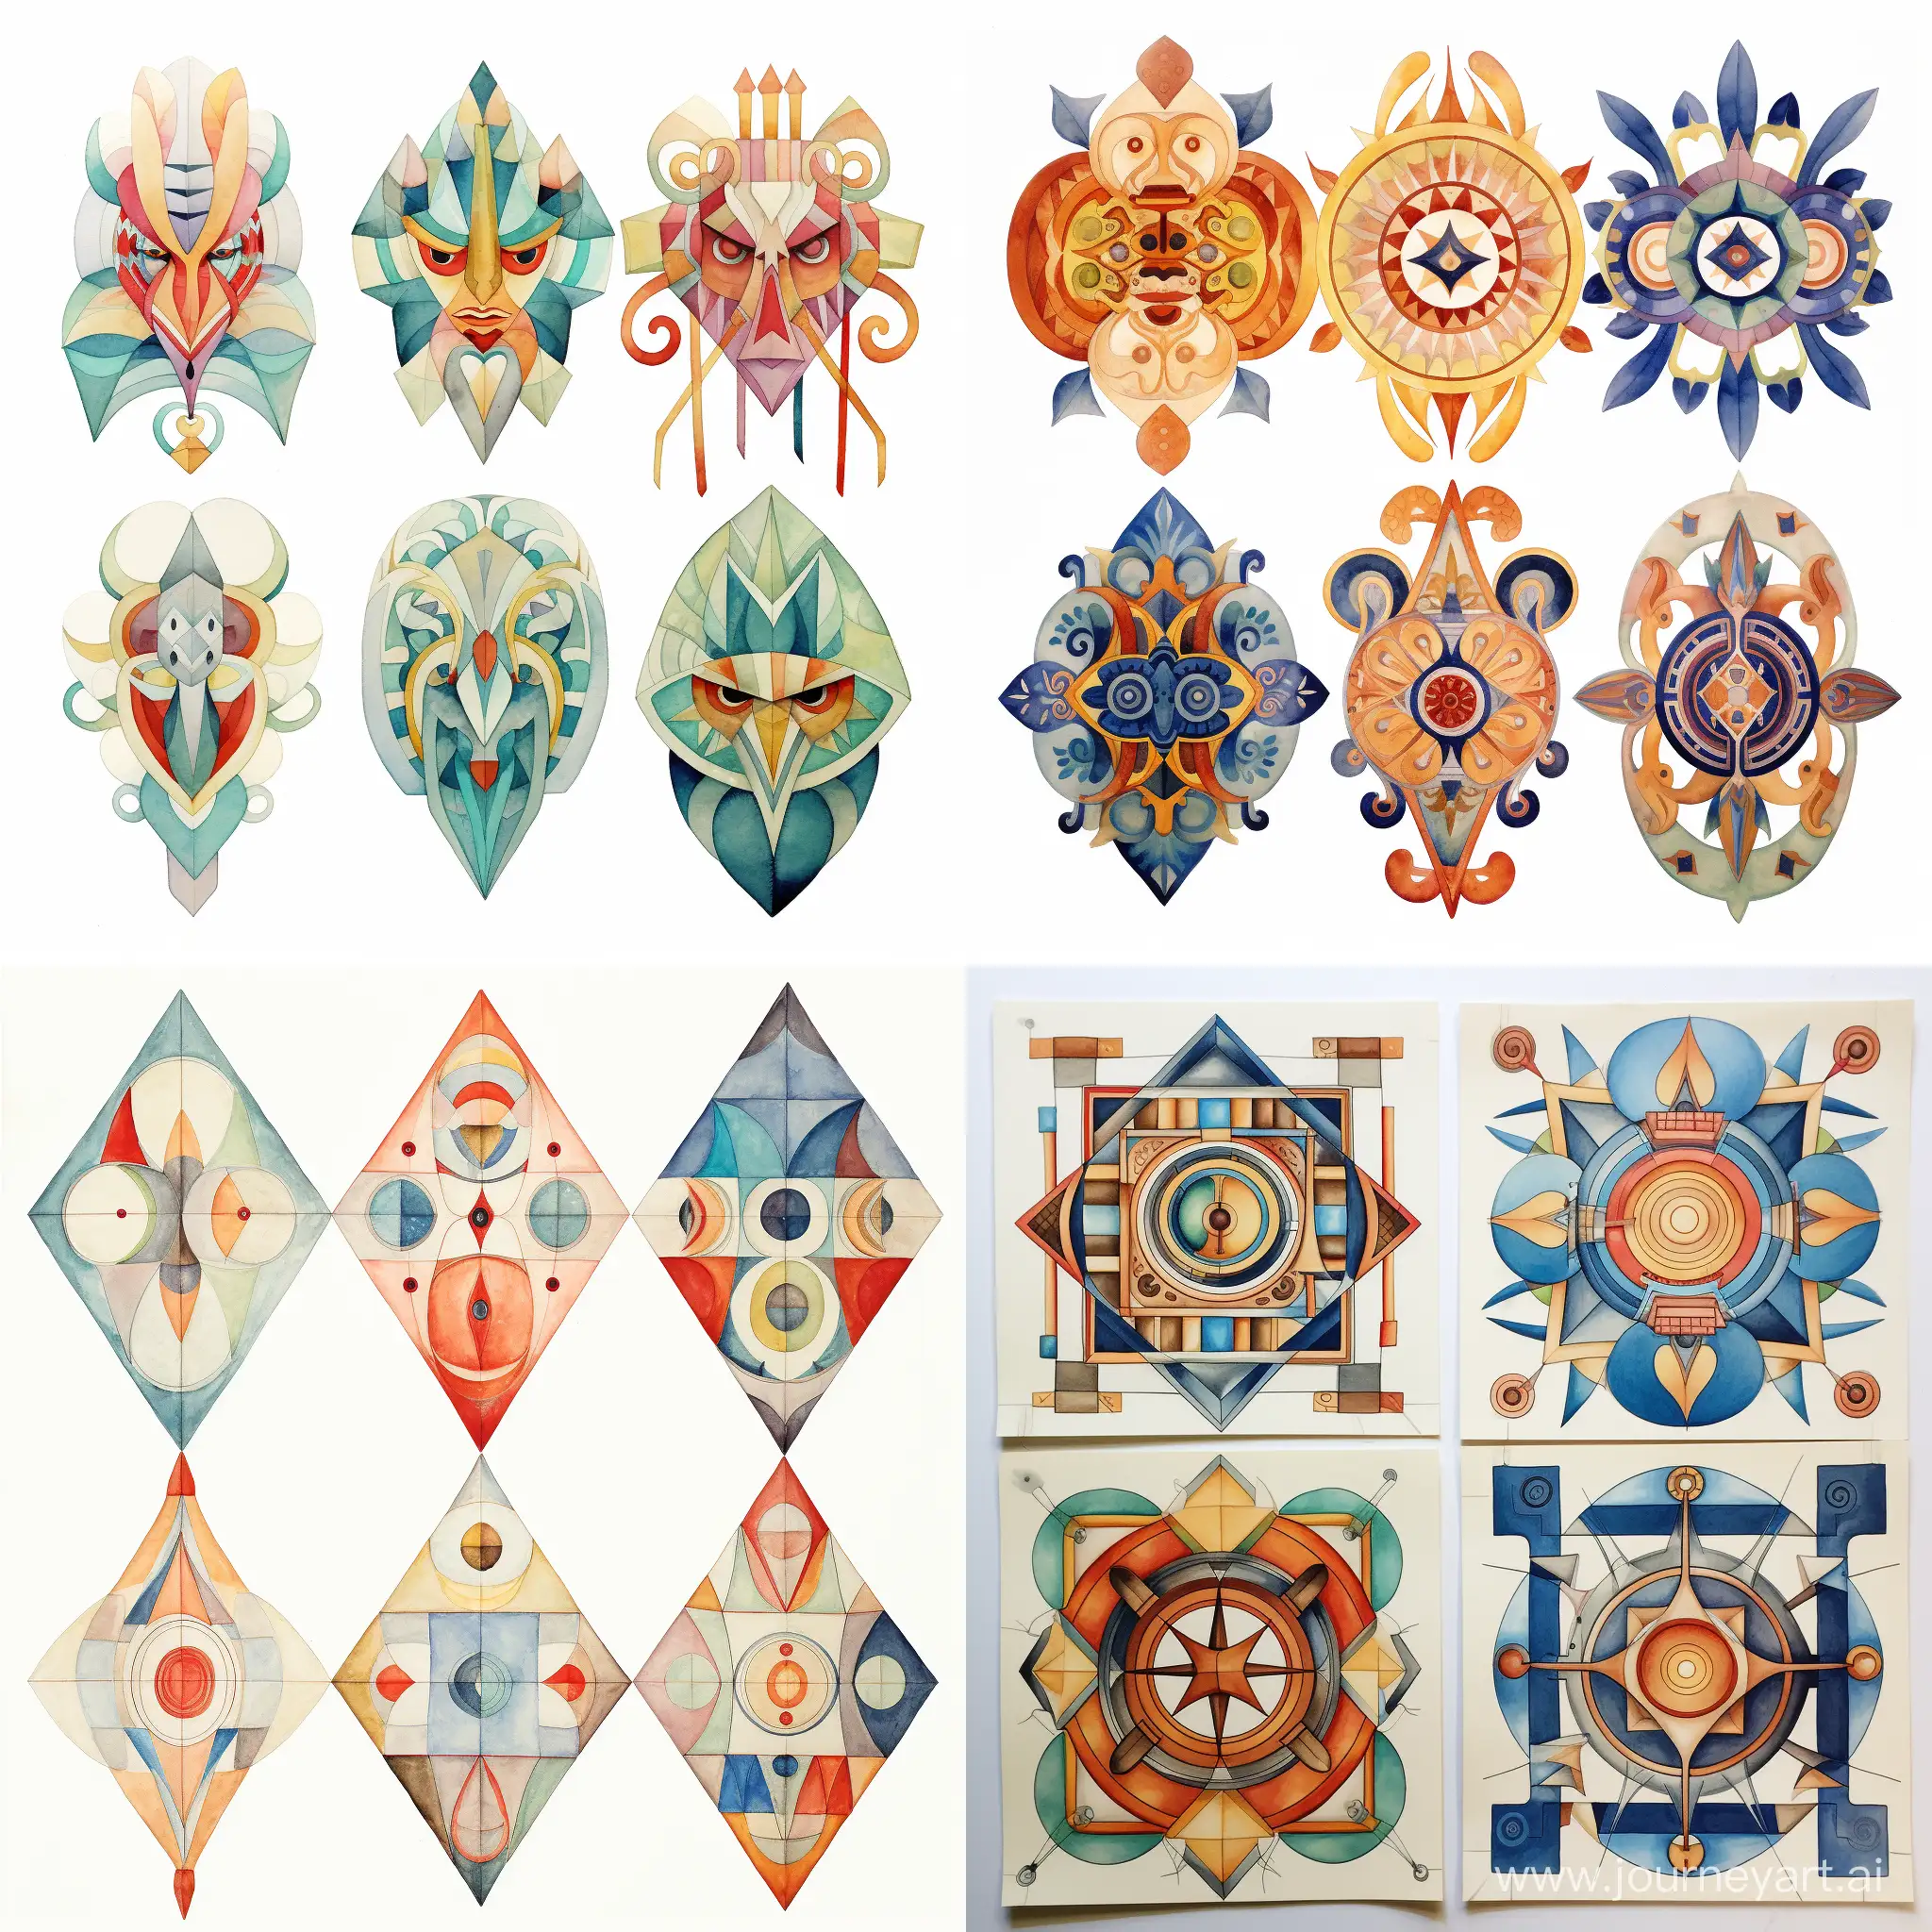 Ancient-Geometric-Pattern-Variations-Stylized-Caricature-by-Vikto-Ngai-in-Watercolor